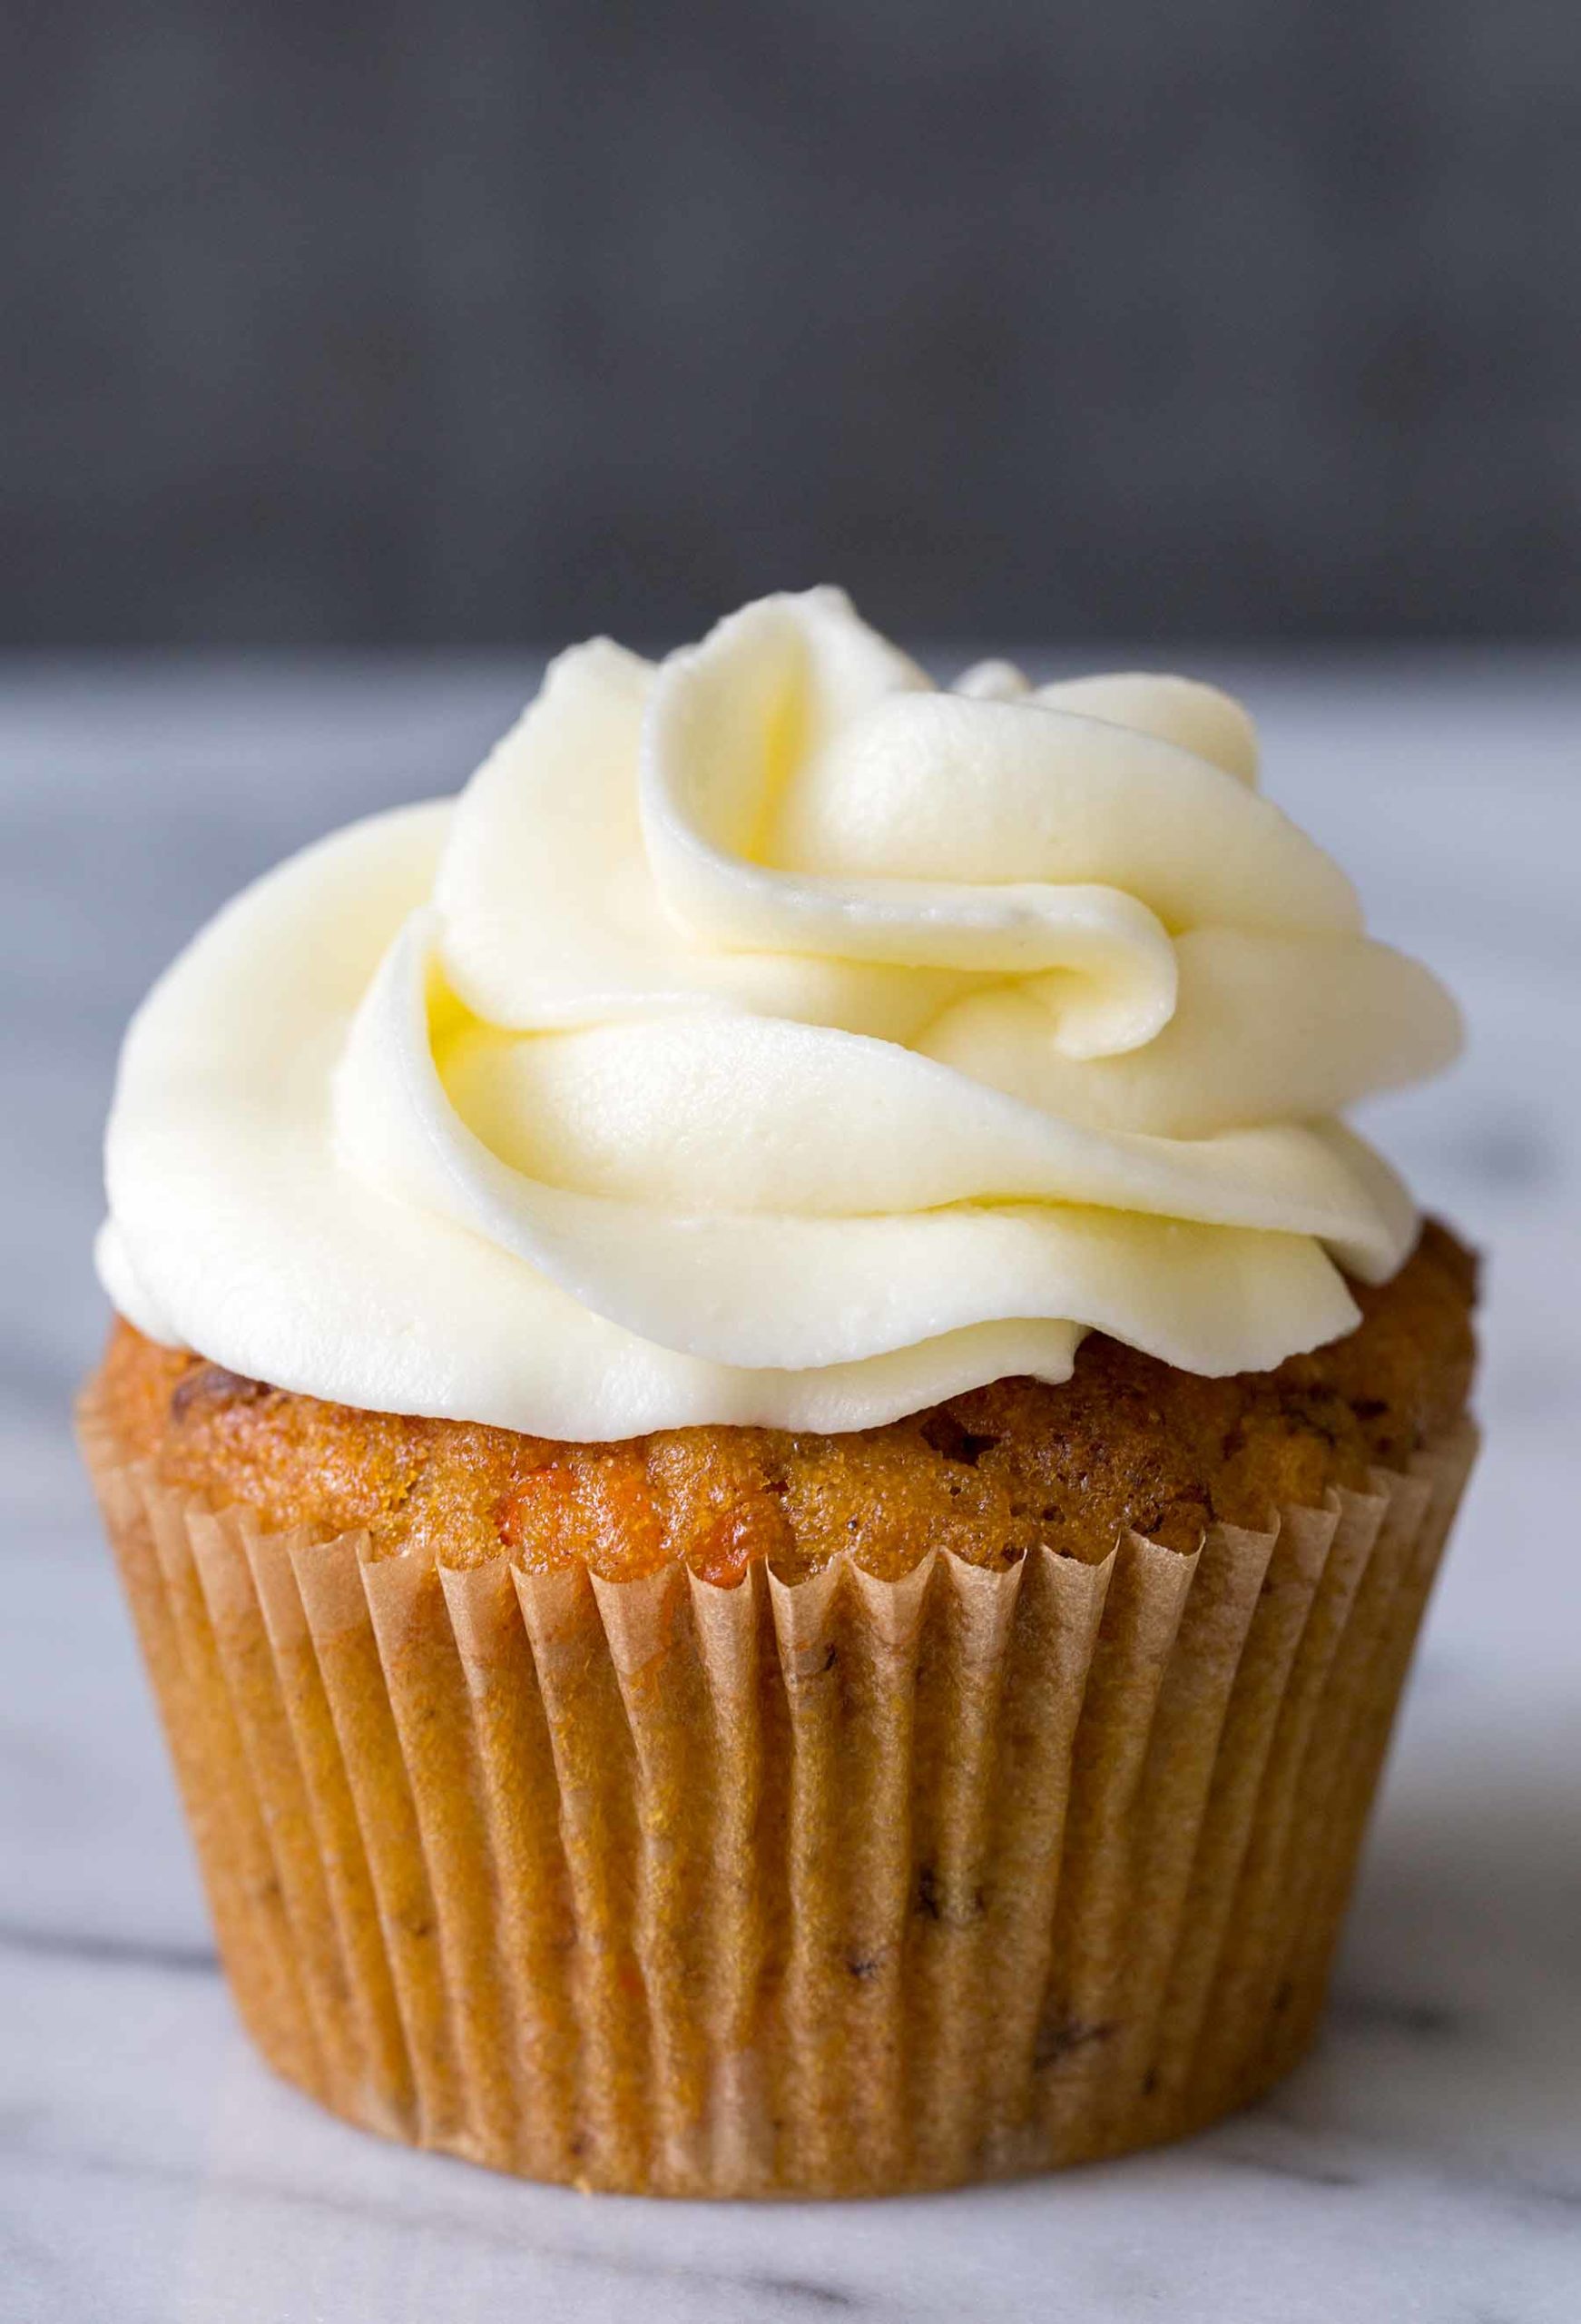 One single carrot cake cupcake topped with cream cheese frosting